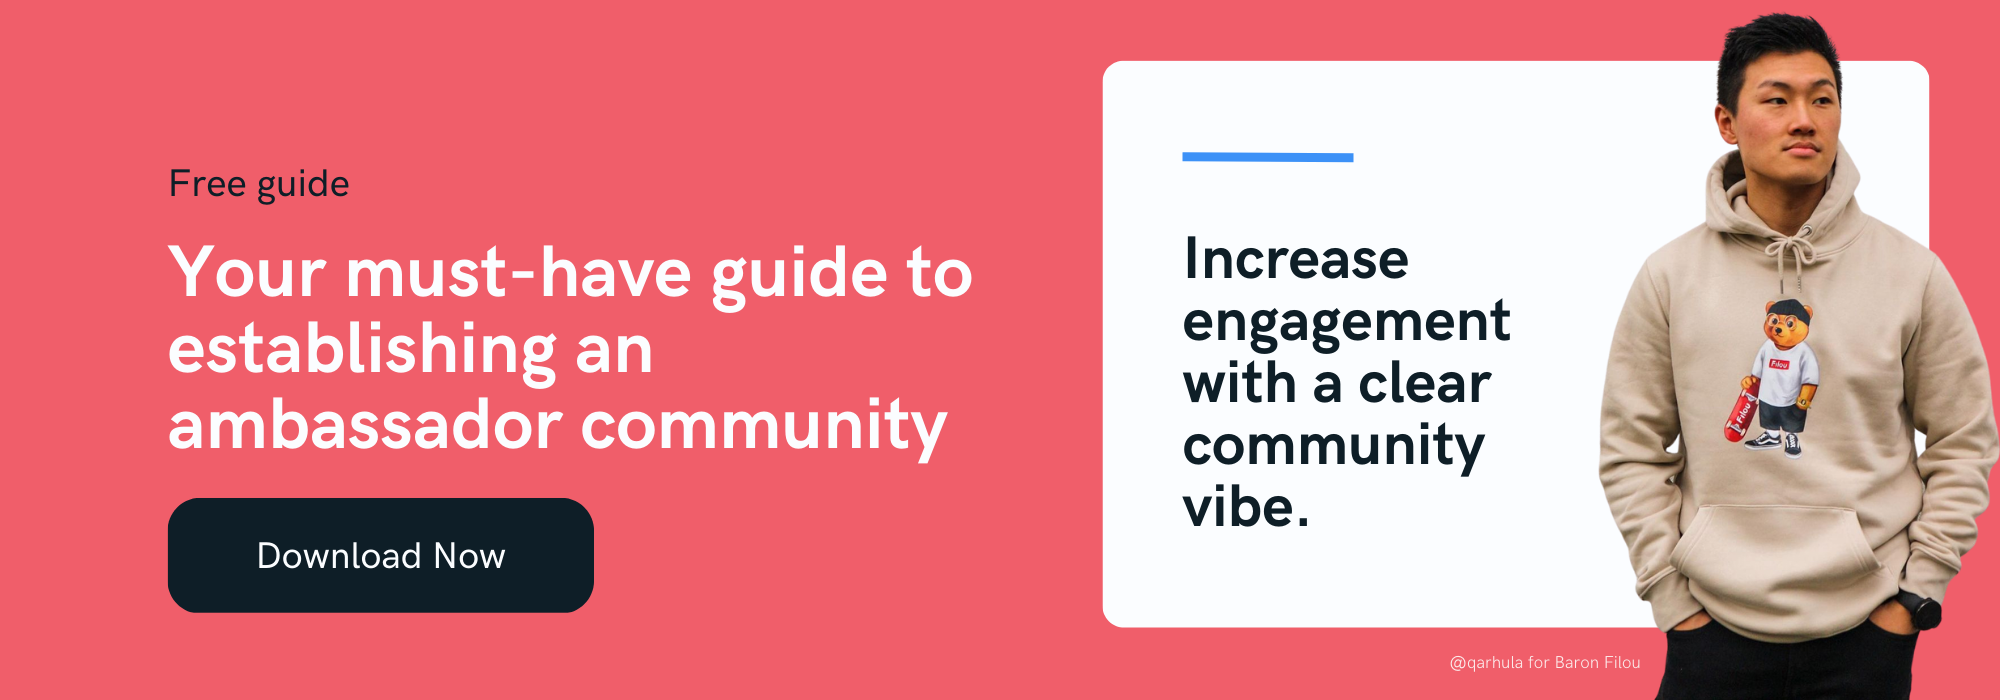 Your must-have guide to establishing an ambassador community 